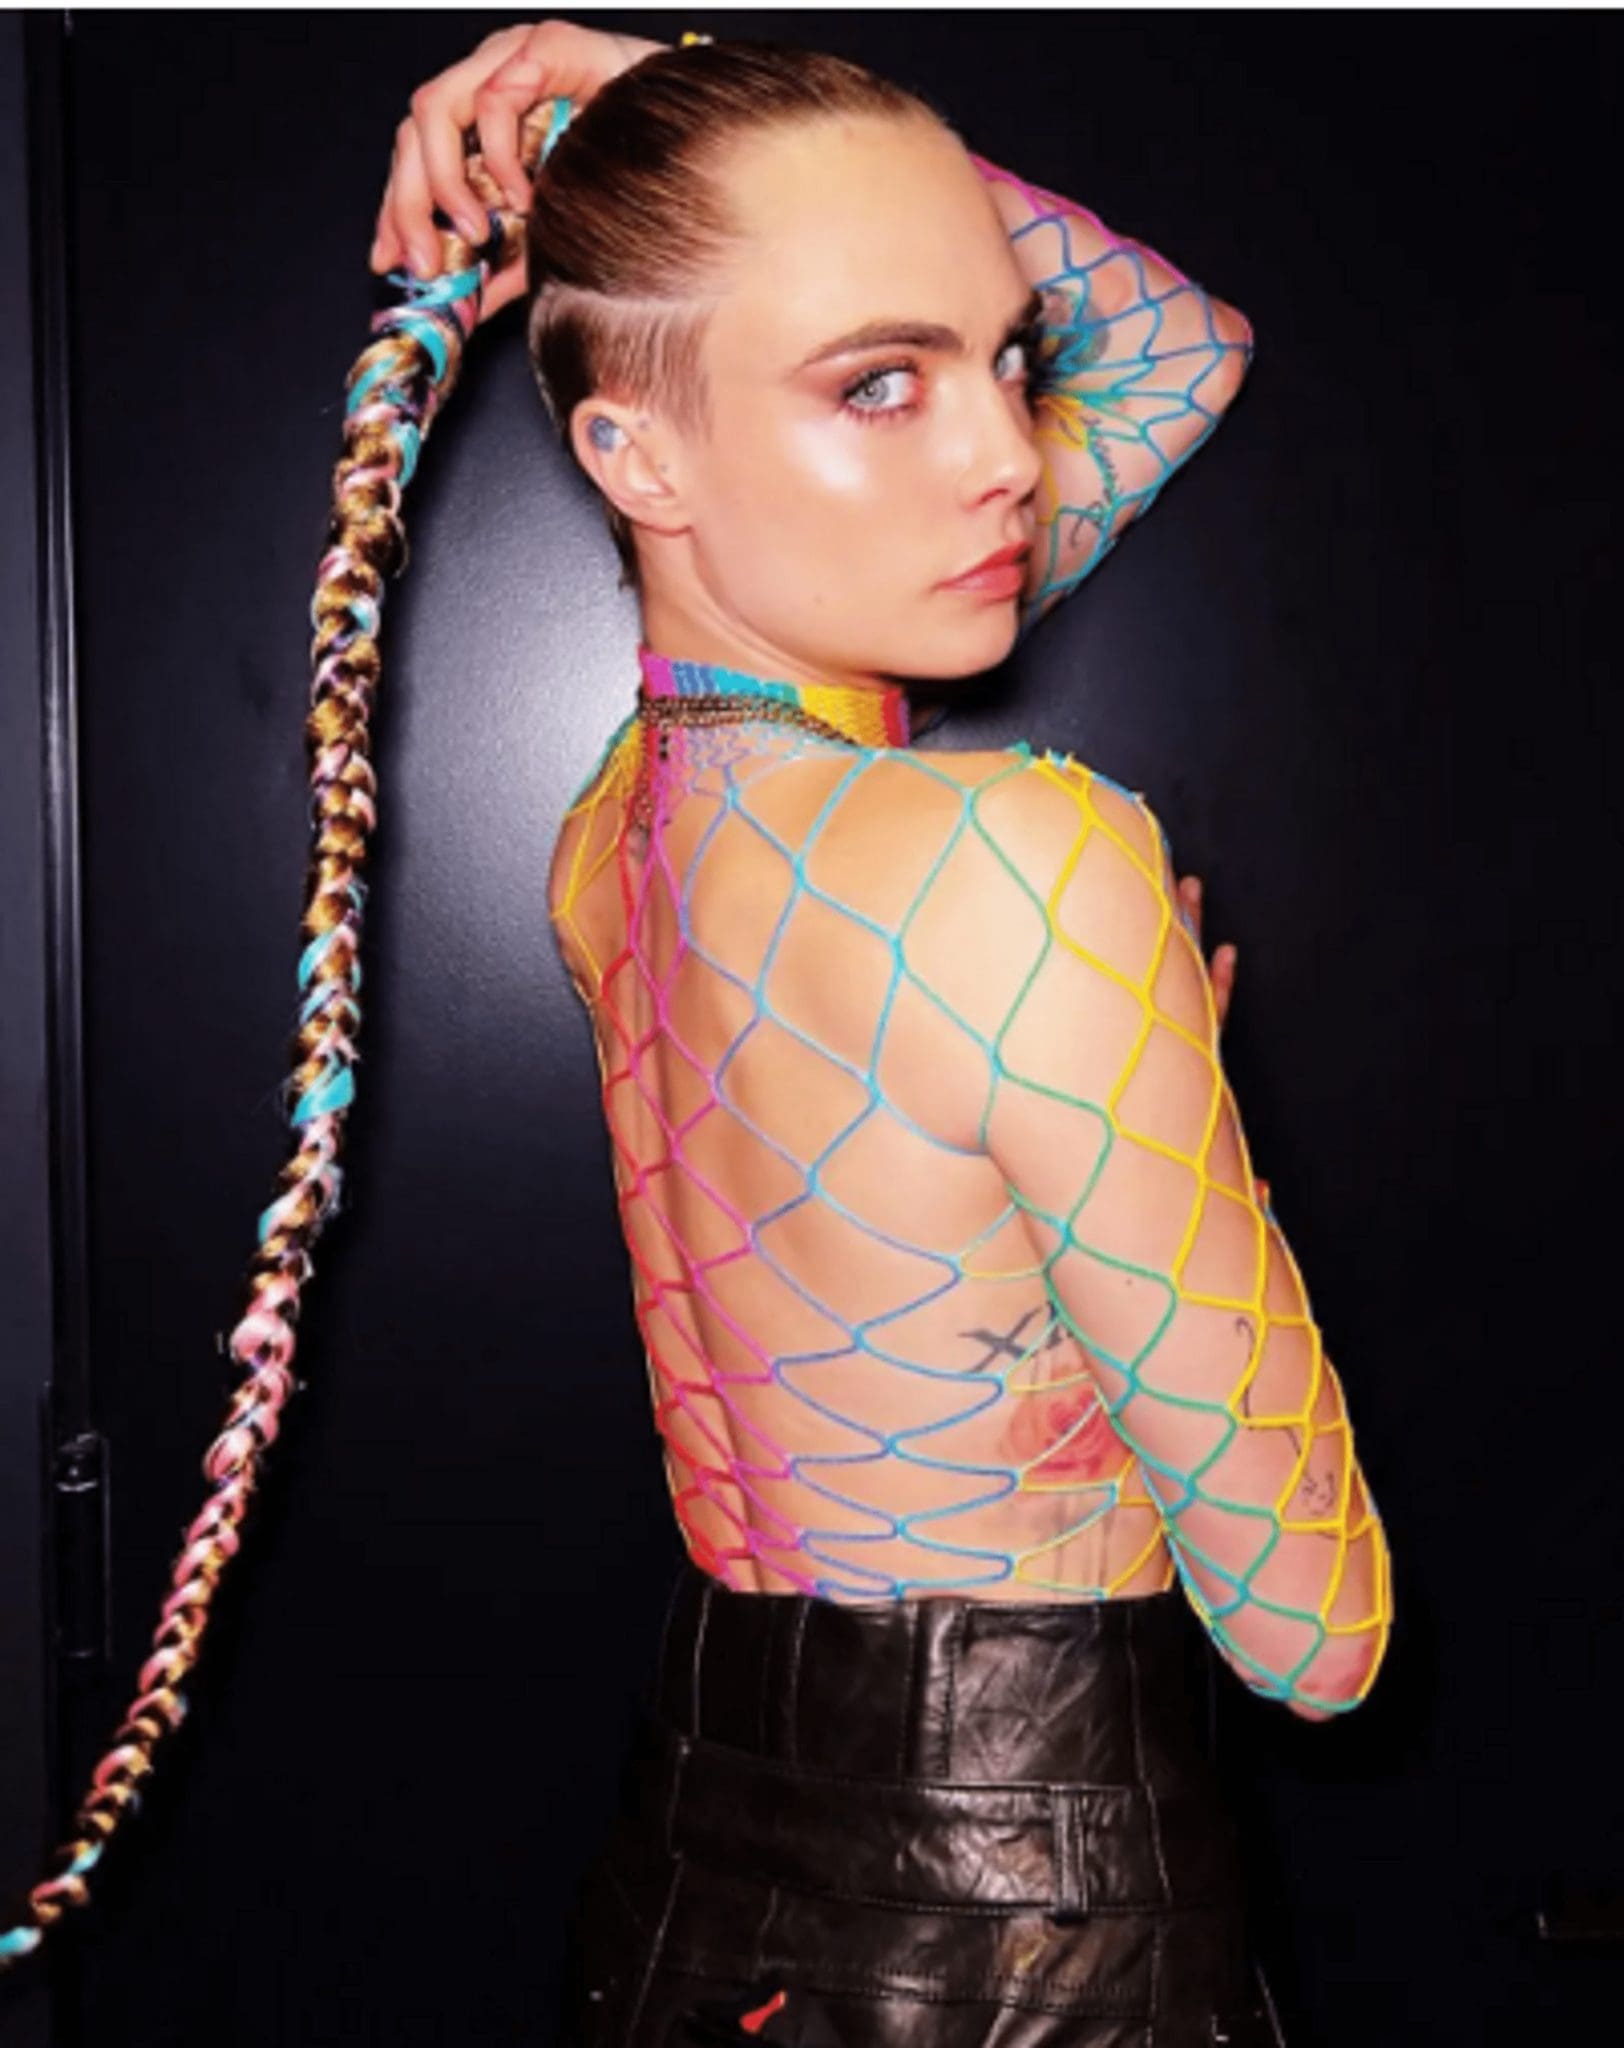 Cara Delevingne posted her naked photos